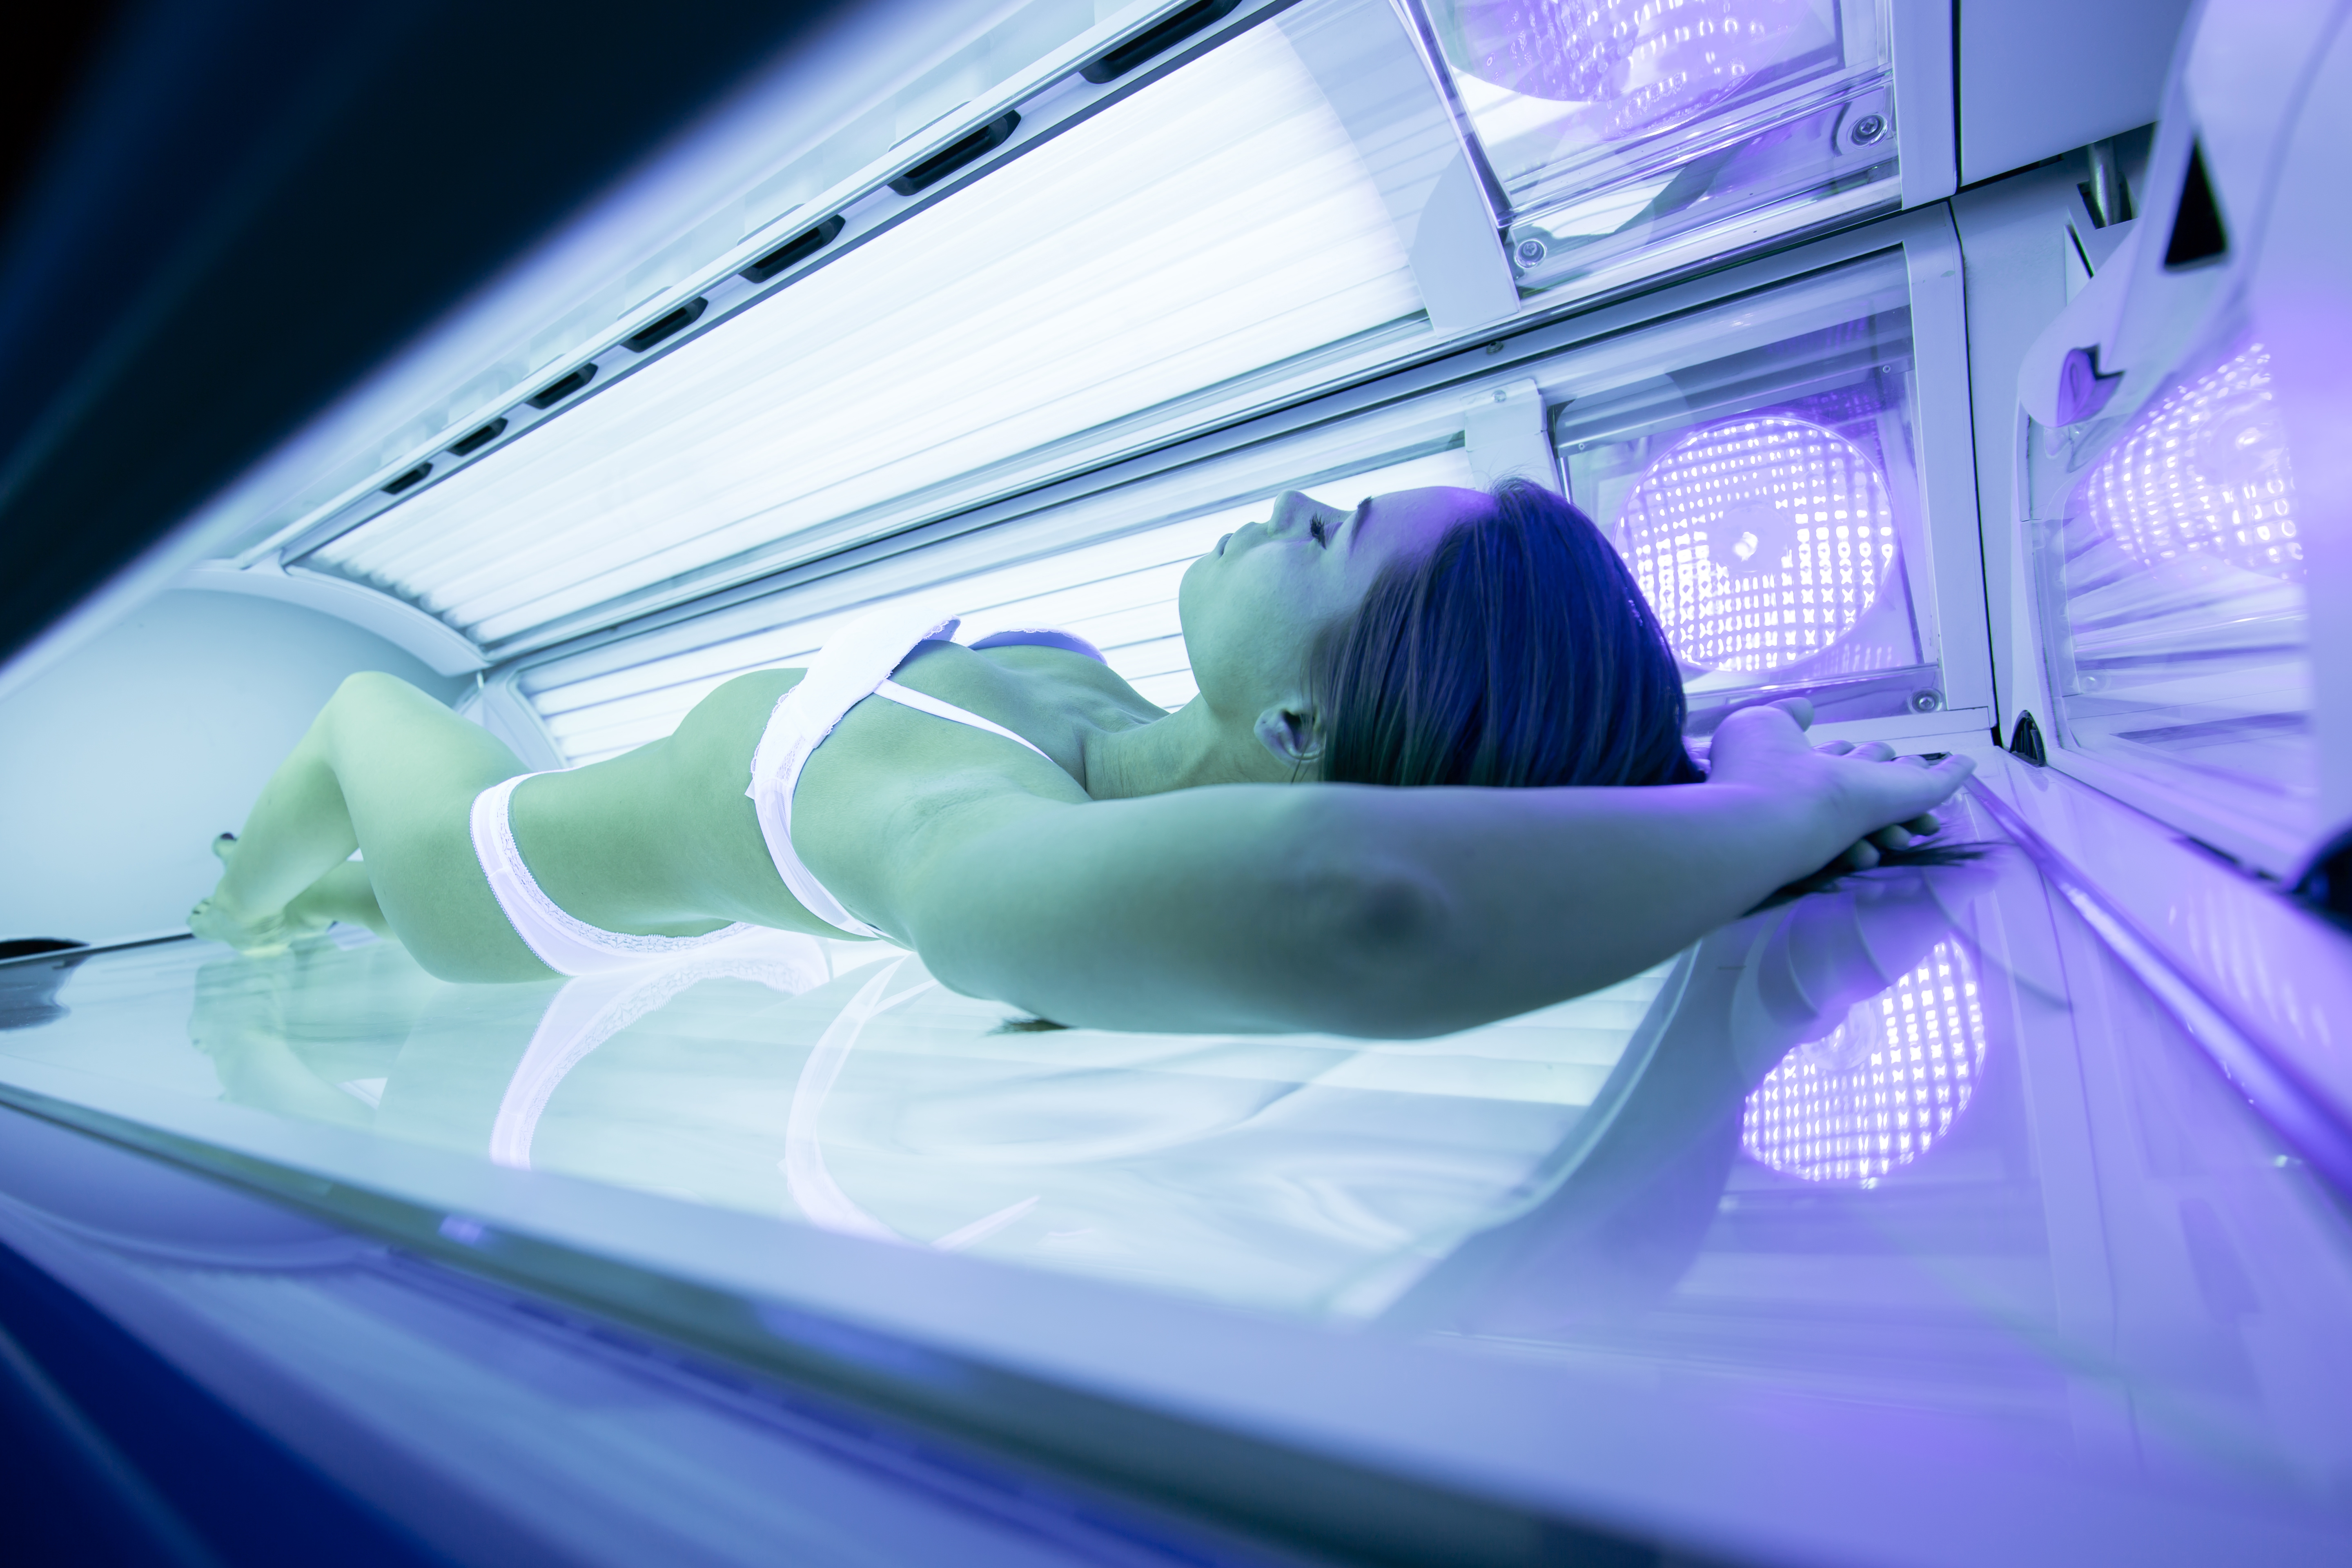 The Newest Reason To Avoid Tanning Beds Could Be Viral In Nature - Travel n...